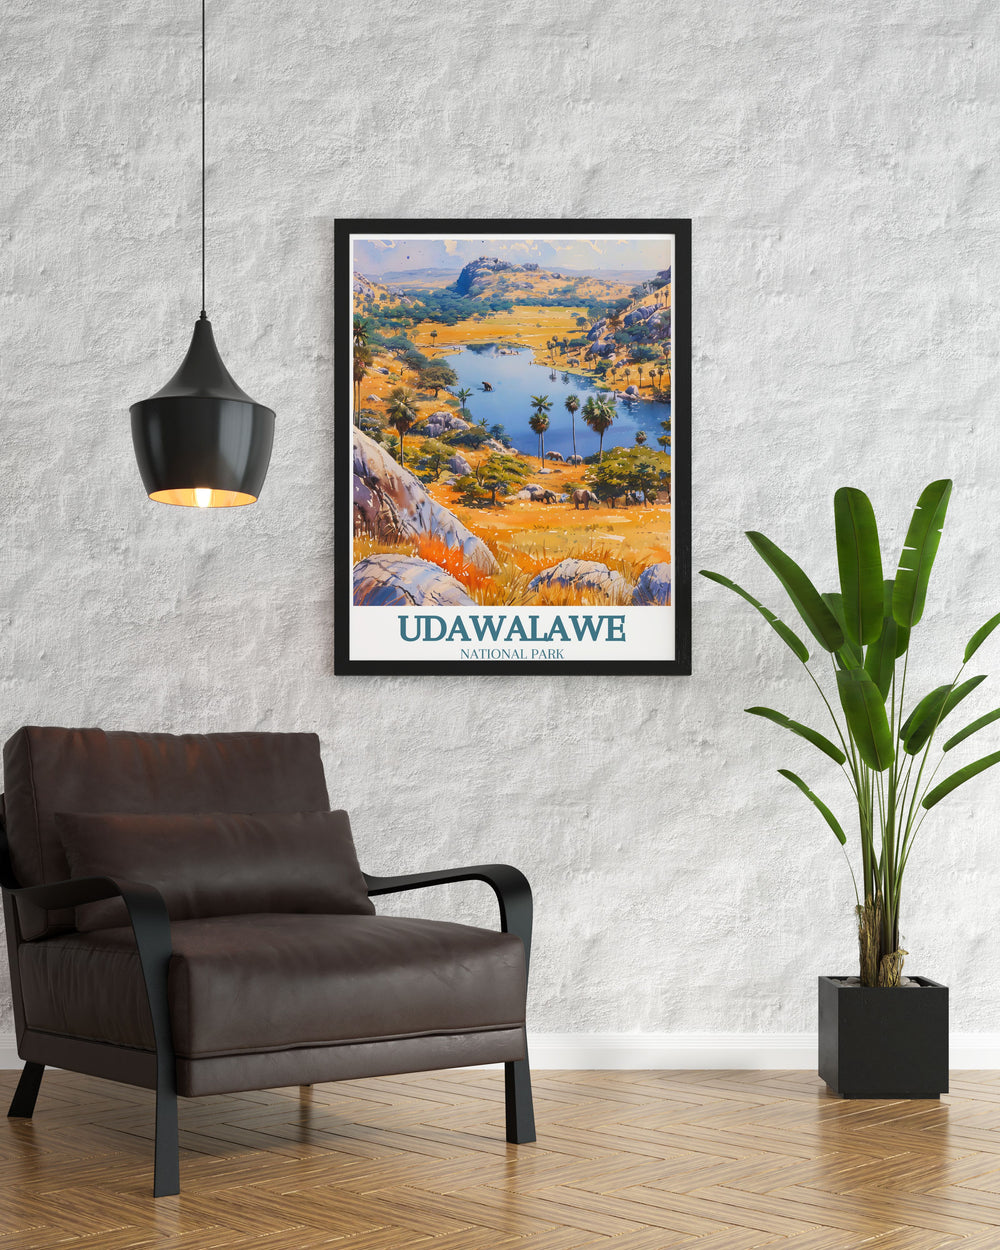 National Park art featuring Udawalawe Reservoir Walawe River with vivid colors and intricate details ideal for enhancing any room with the serene landscapes of Sri Lanka and inspiring adventure and exploration with this beautiful artwork.